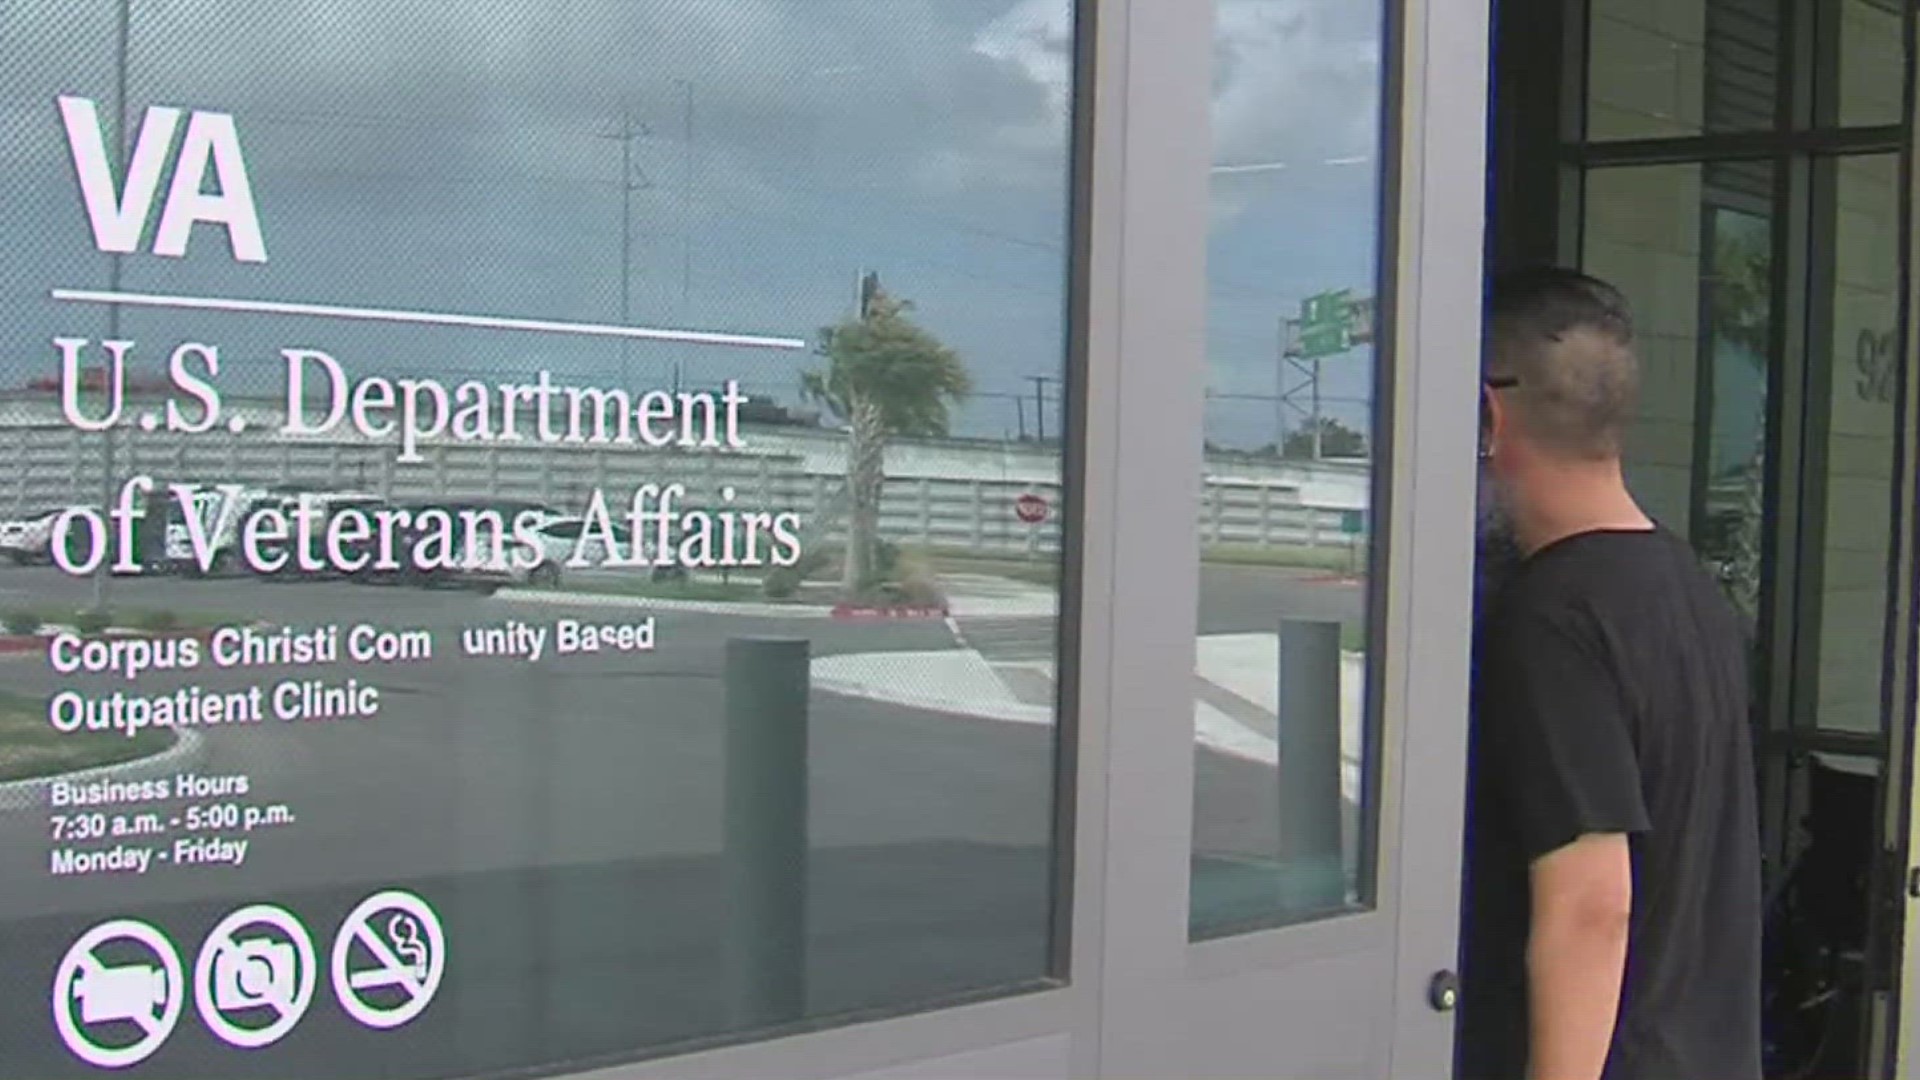 3NEWS spoke with mental health experts who have made resources more available to veterans.